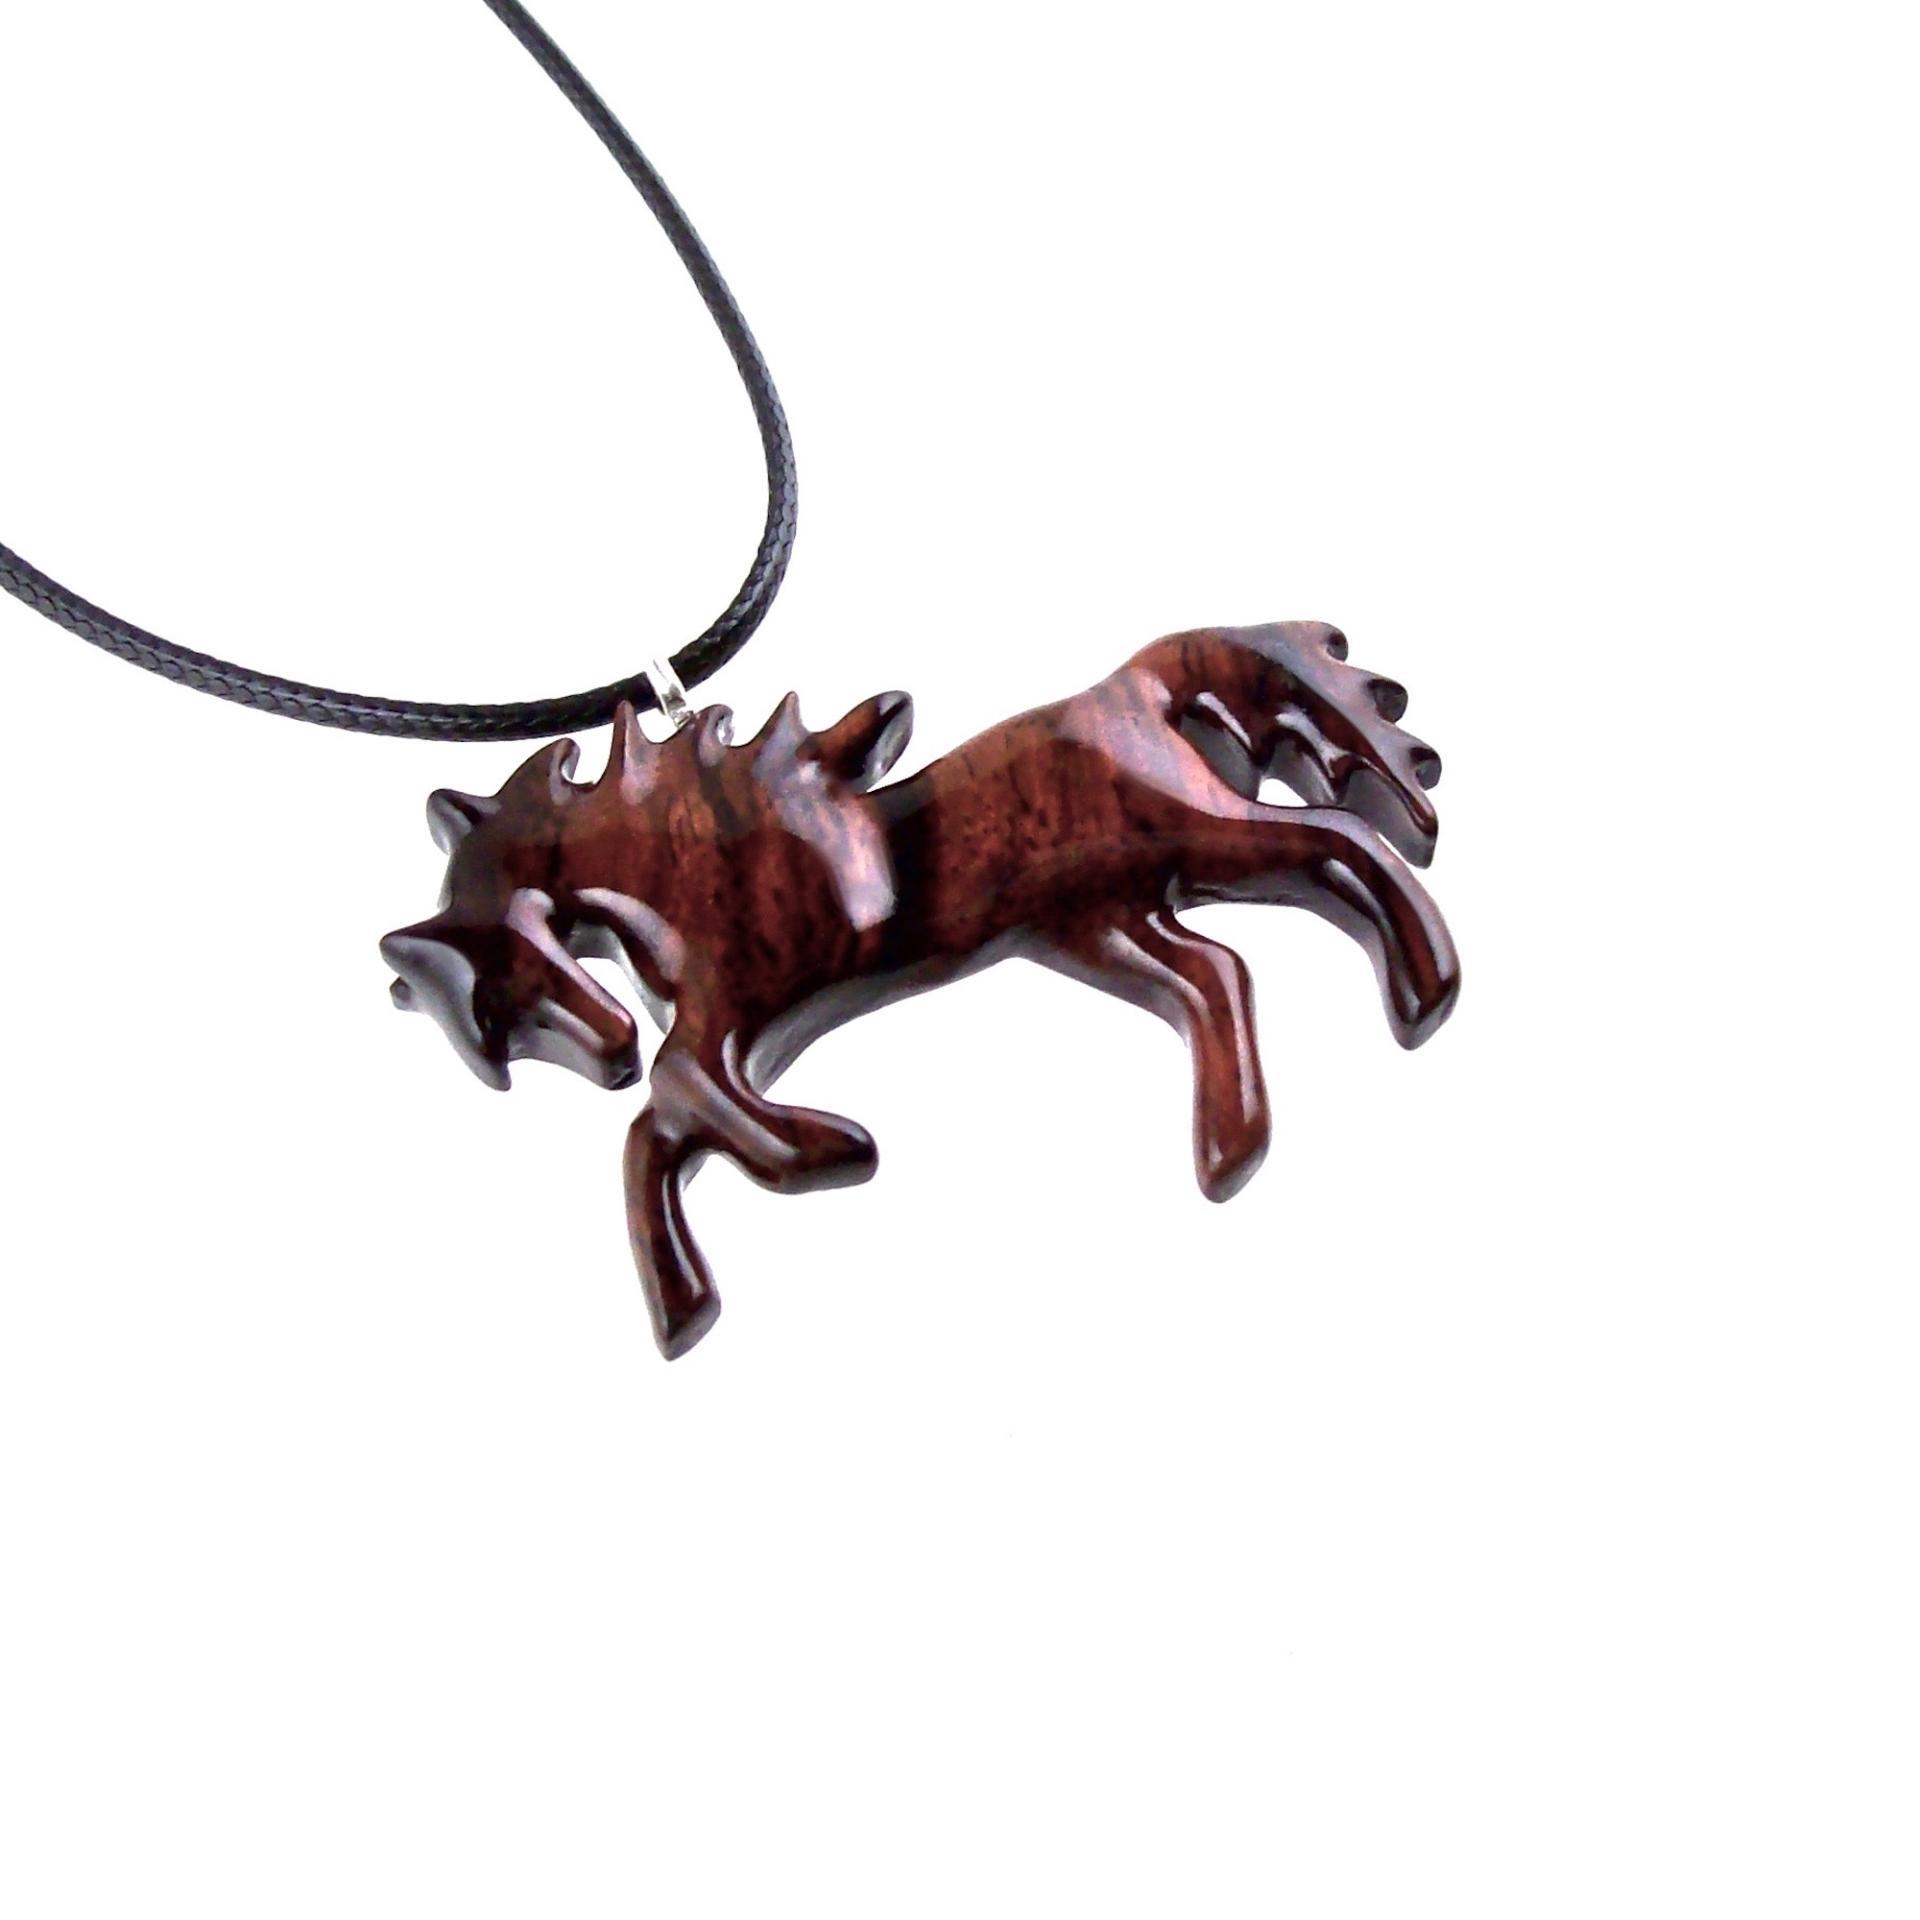 Horse Necklace, Hand Carved Wooden Horse Pendant, Handmade Equestrian Wood Jewelry, One of a Kind Gift for Her Him